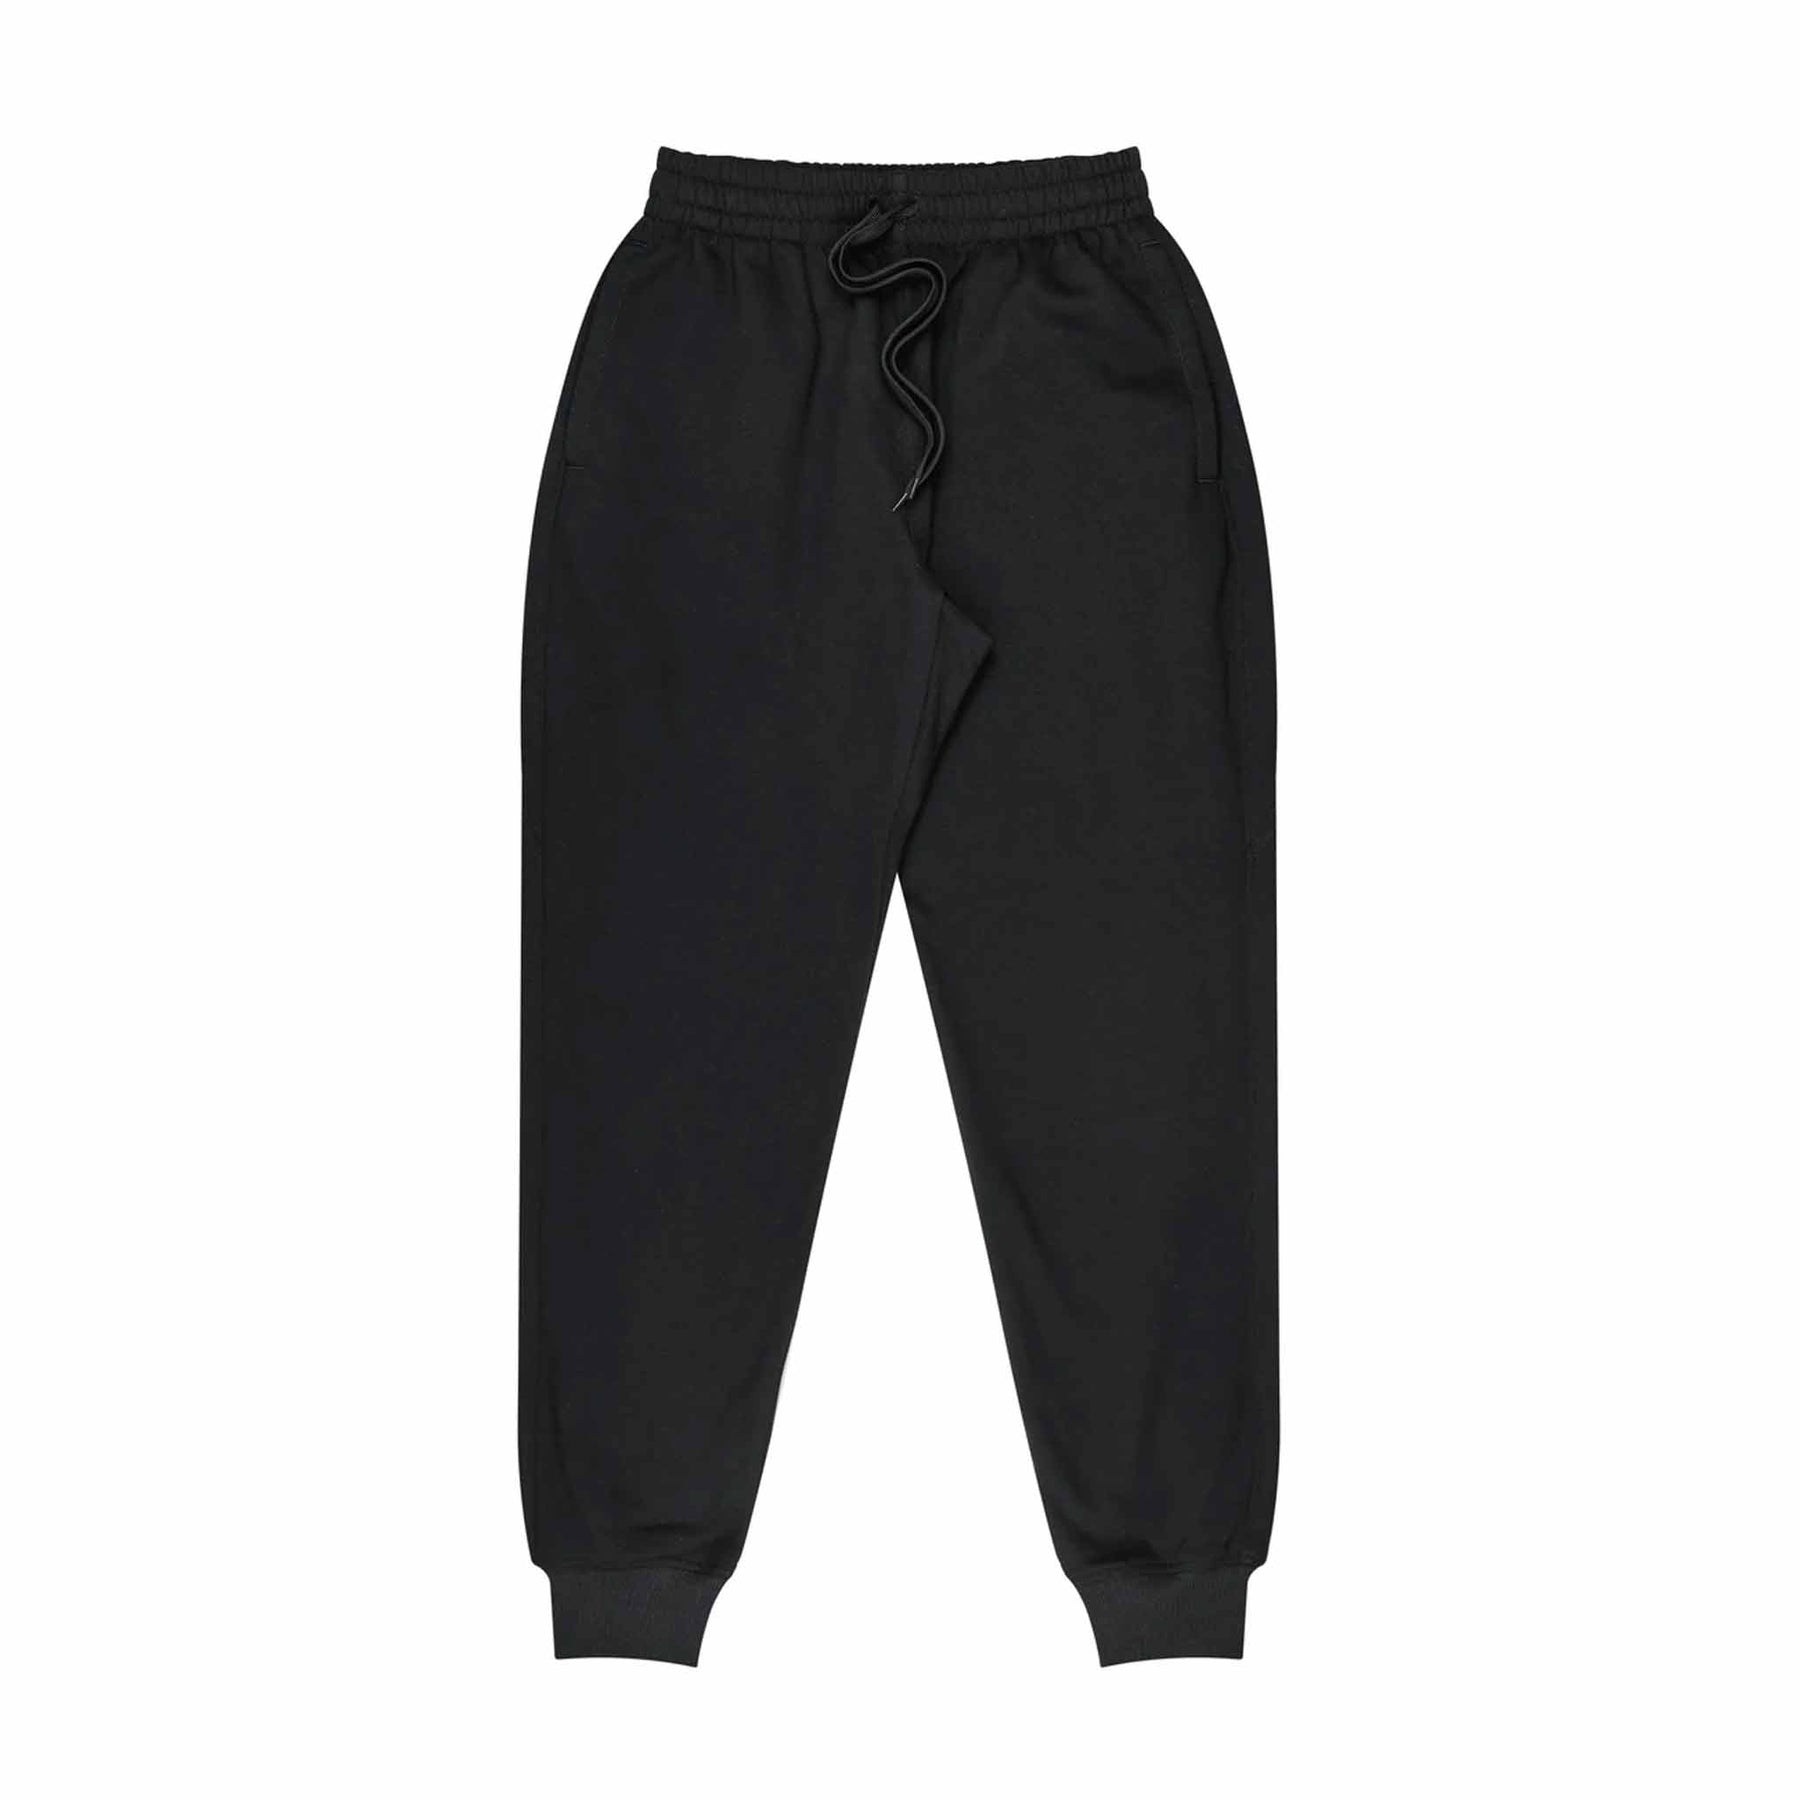 aussie pacific tapered fleece pant in black